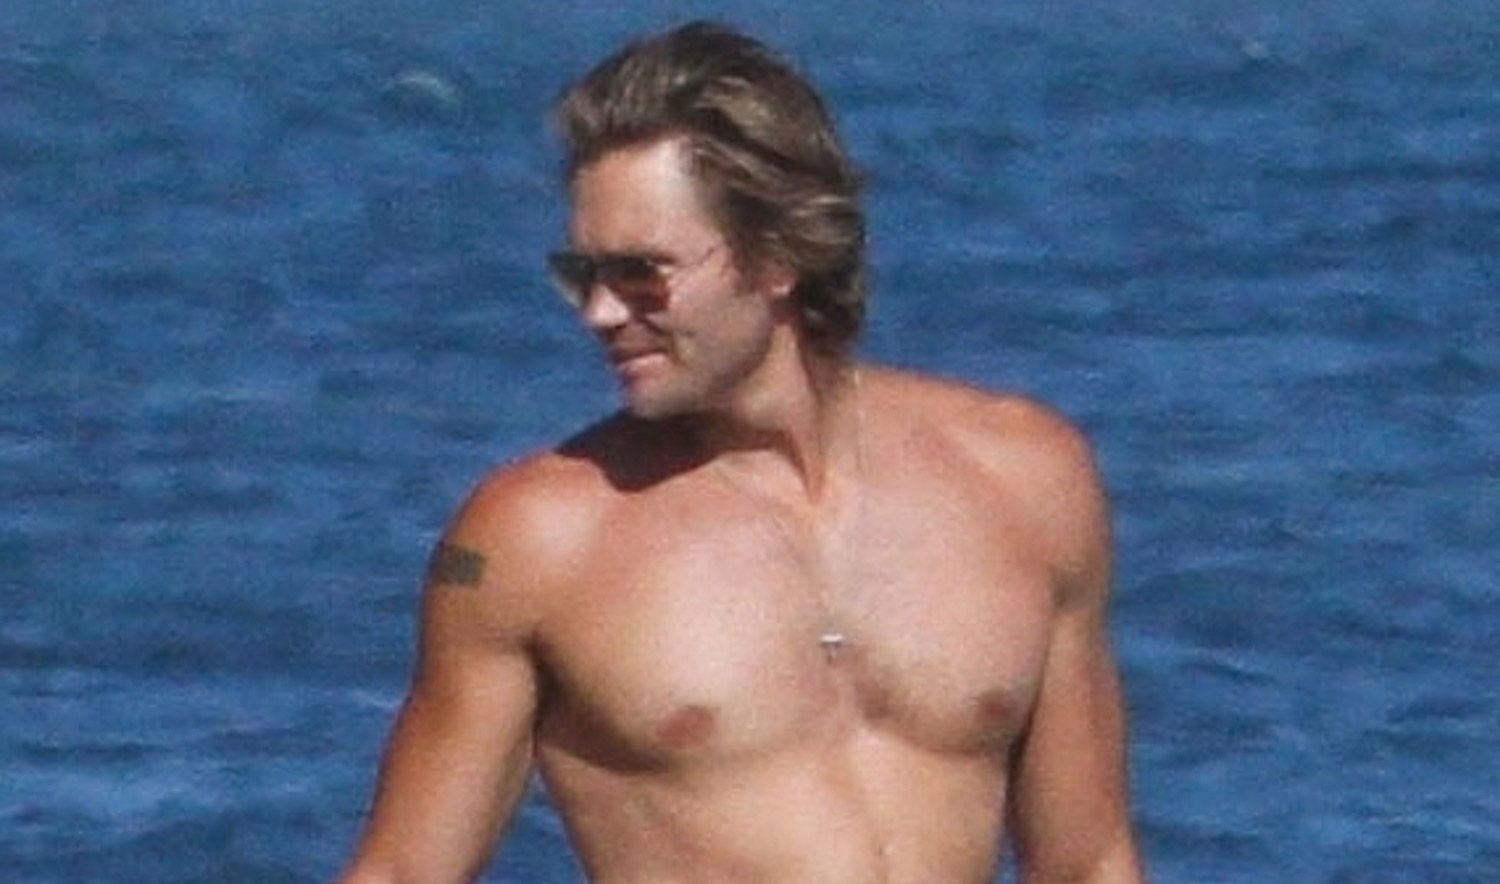 Chad Michael Murray Looks So Hot in These New Shirtless Beach Photos! 